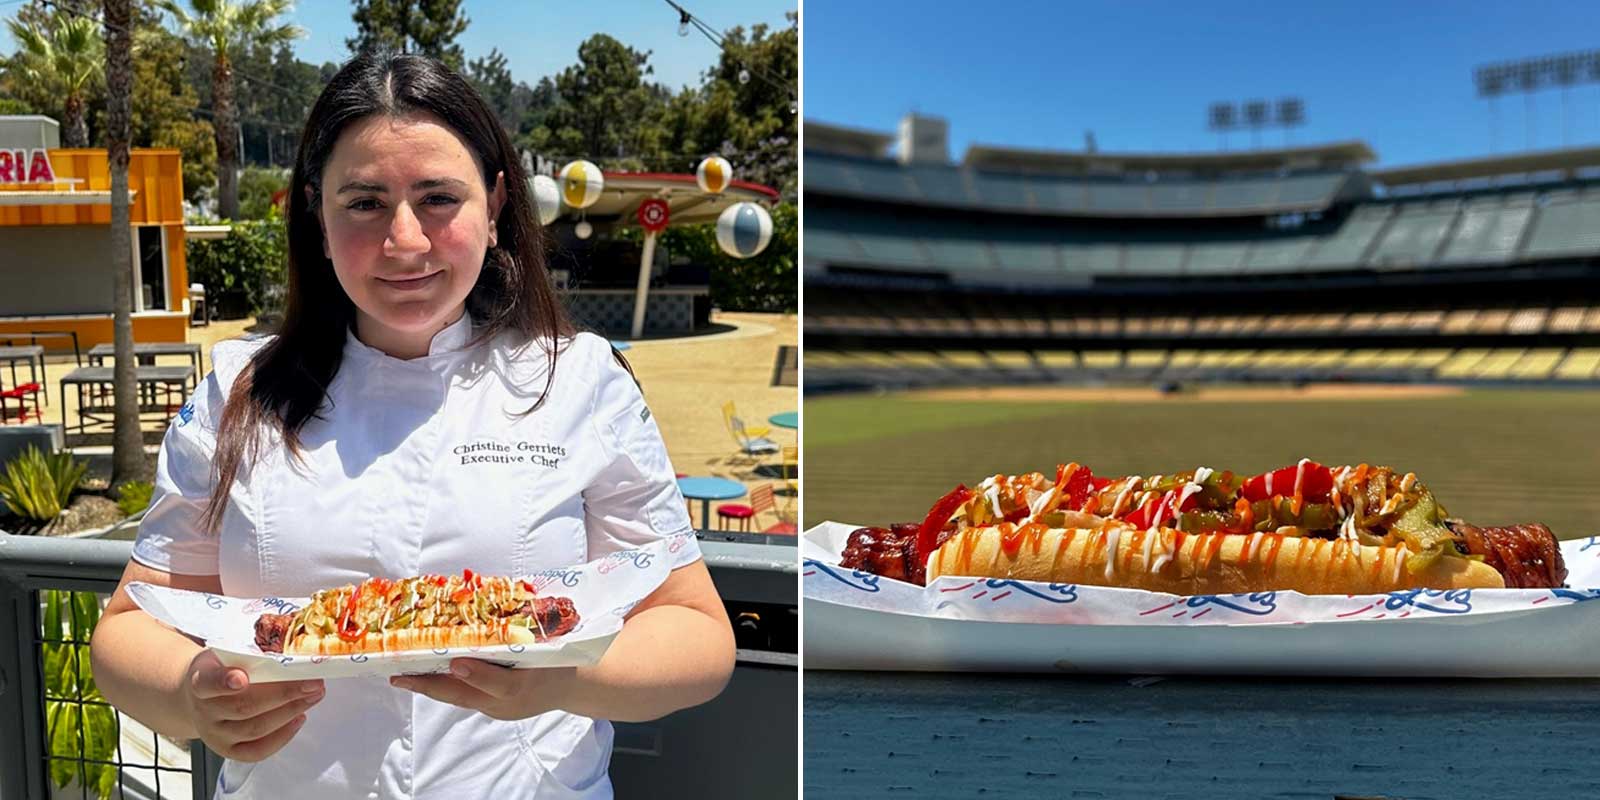 Chef Christine Gerriets with the L.A. Bacon Wrapped Dog